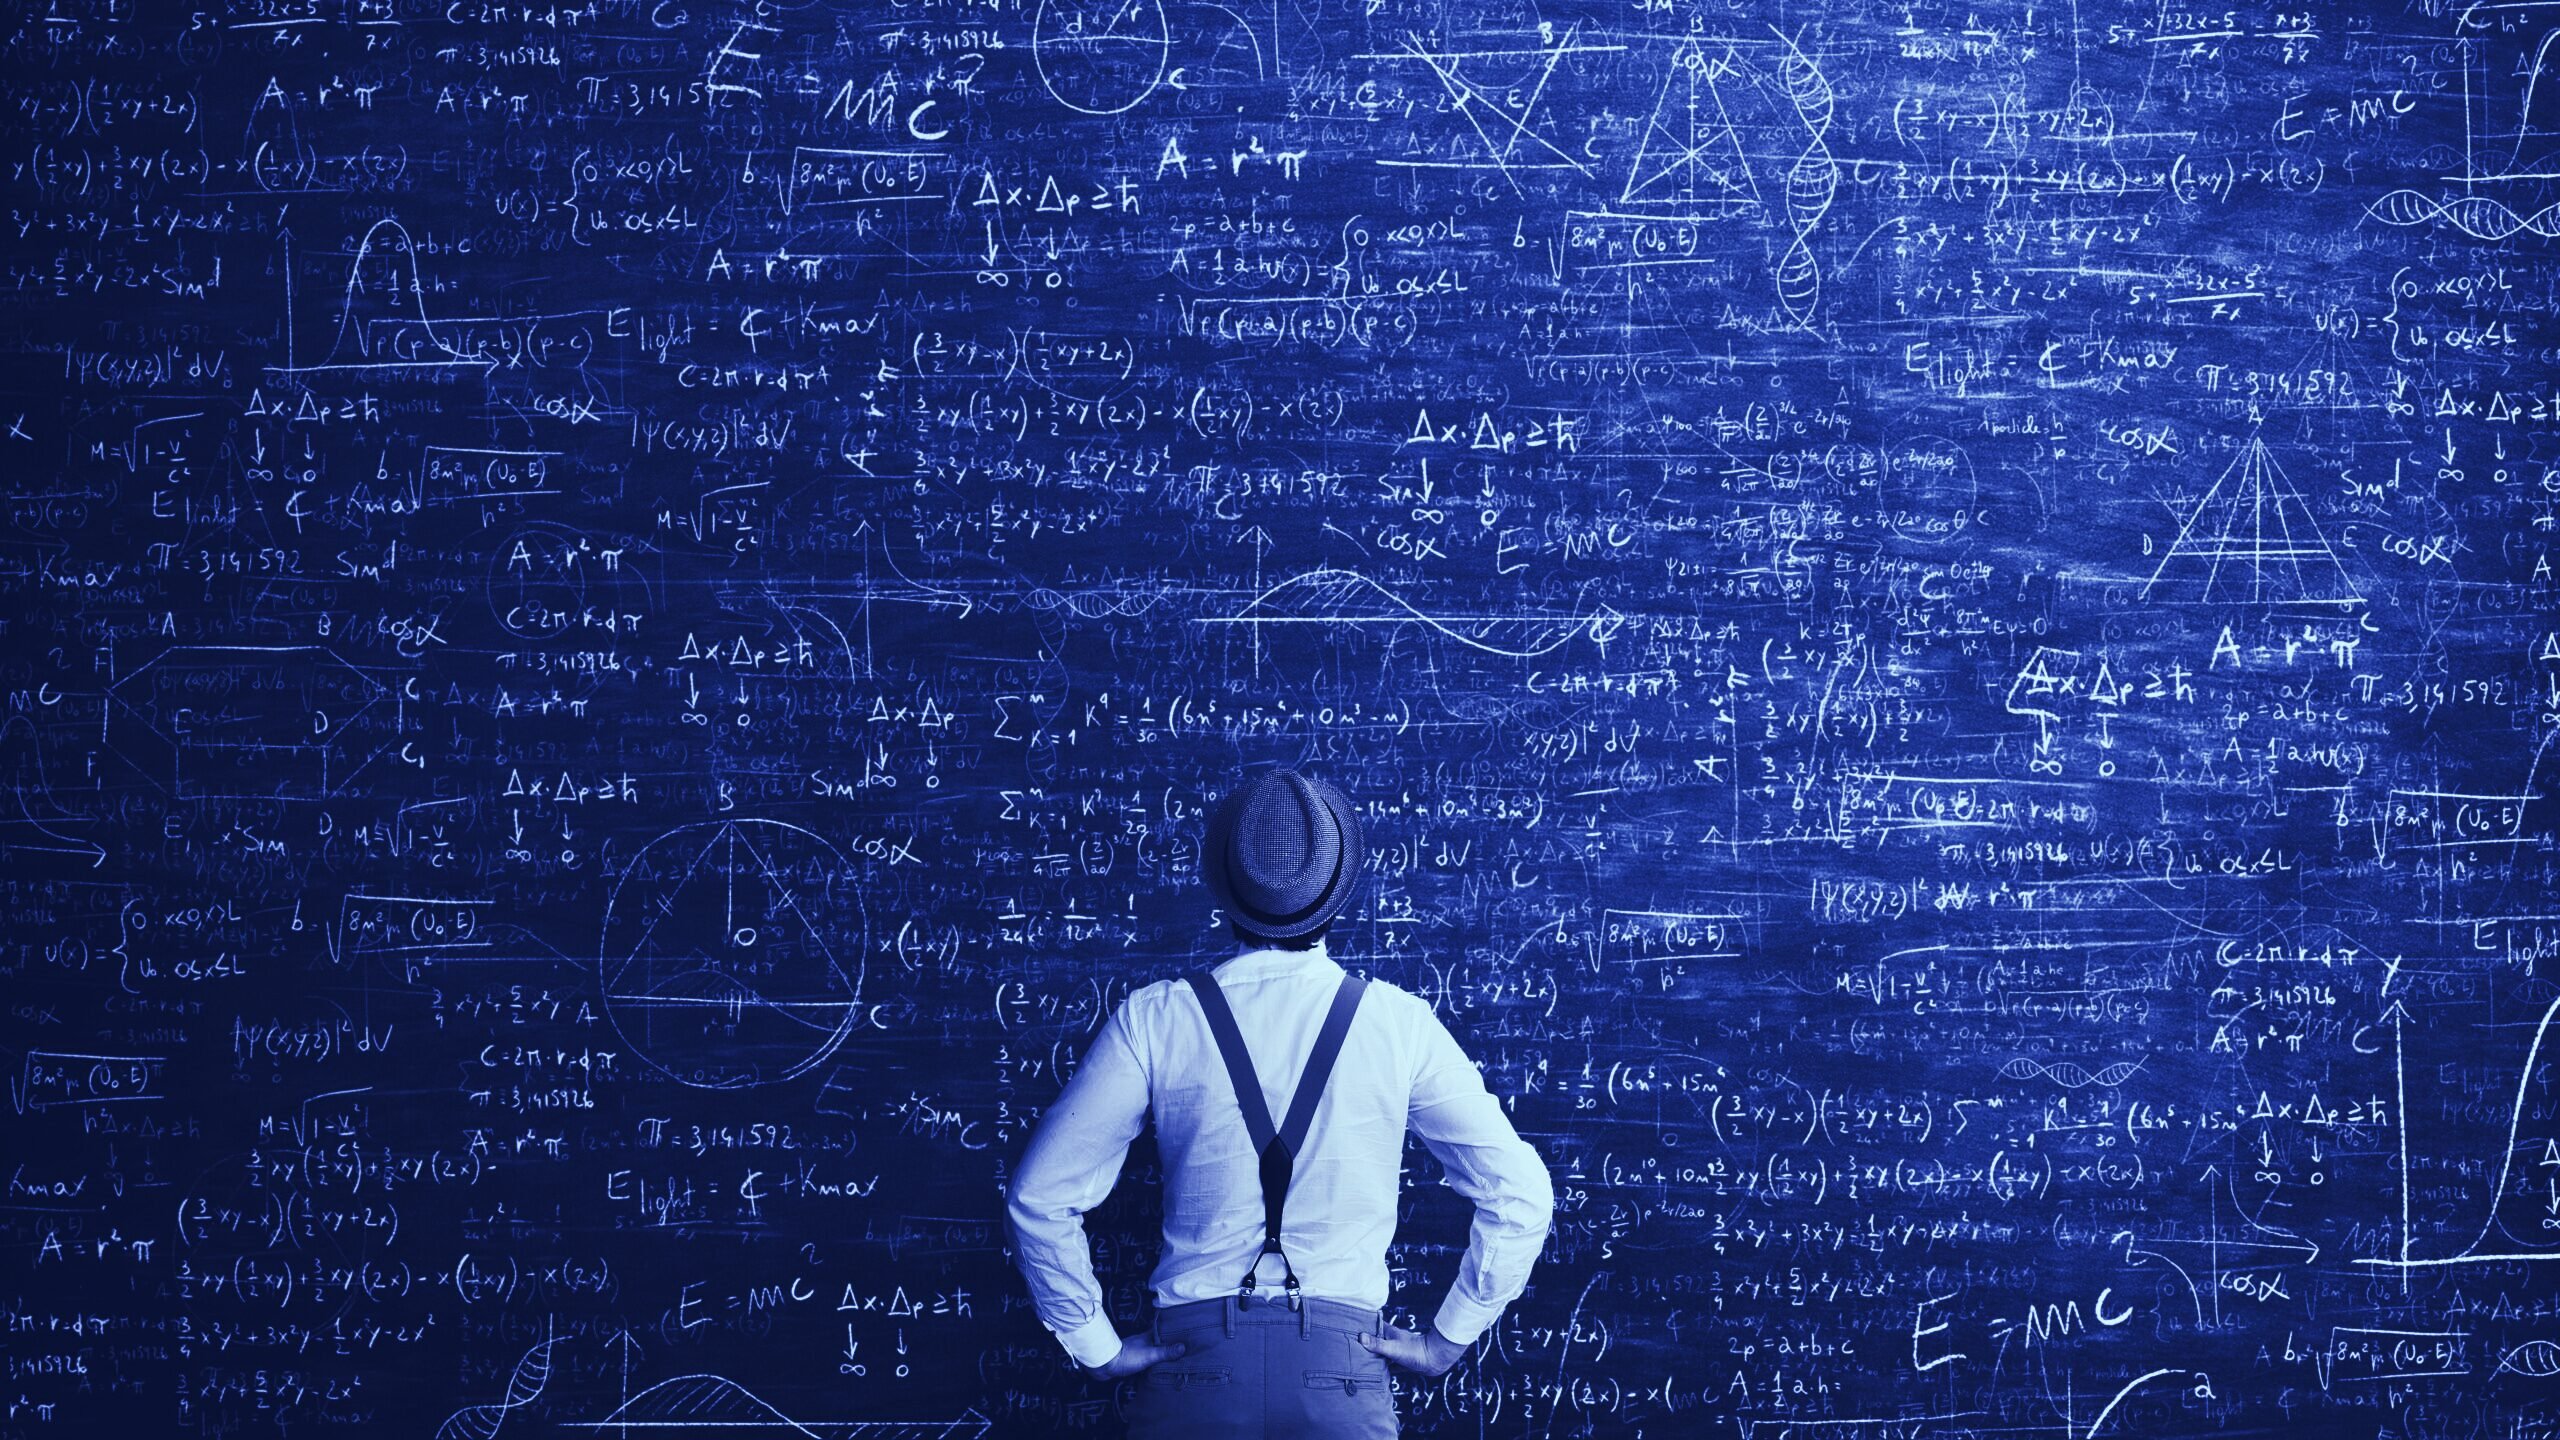 Bitcoin maxis figuring out ETH total supply be like. Image: Shutterstock